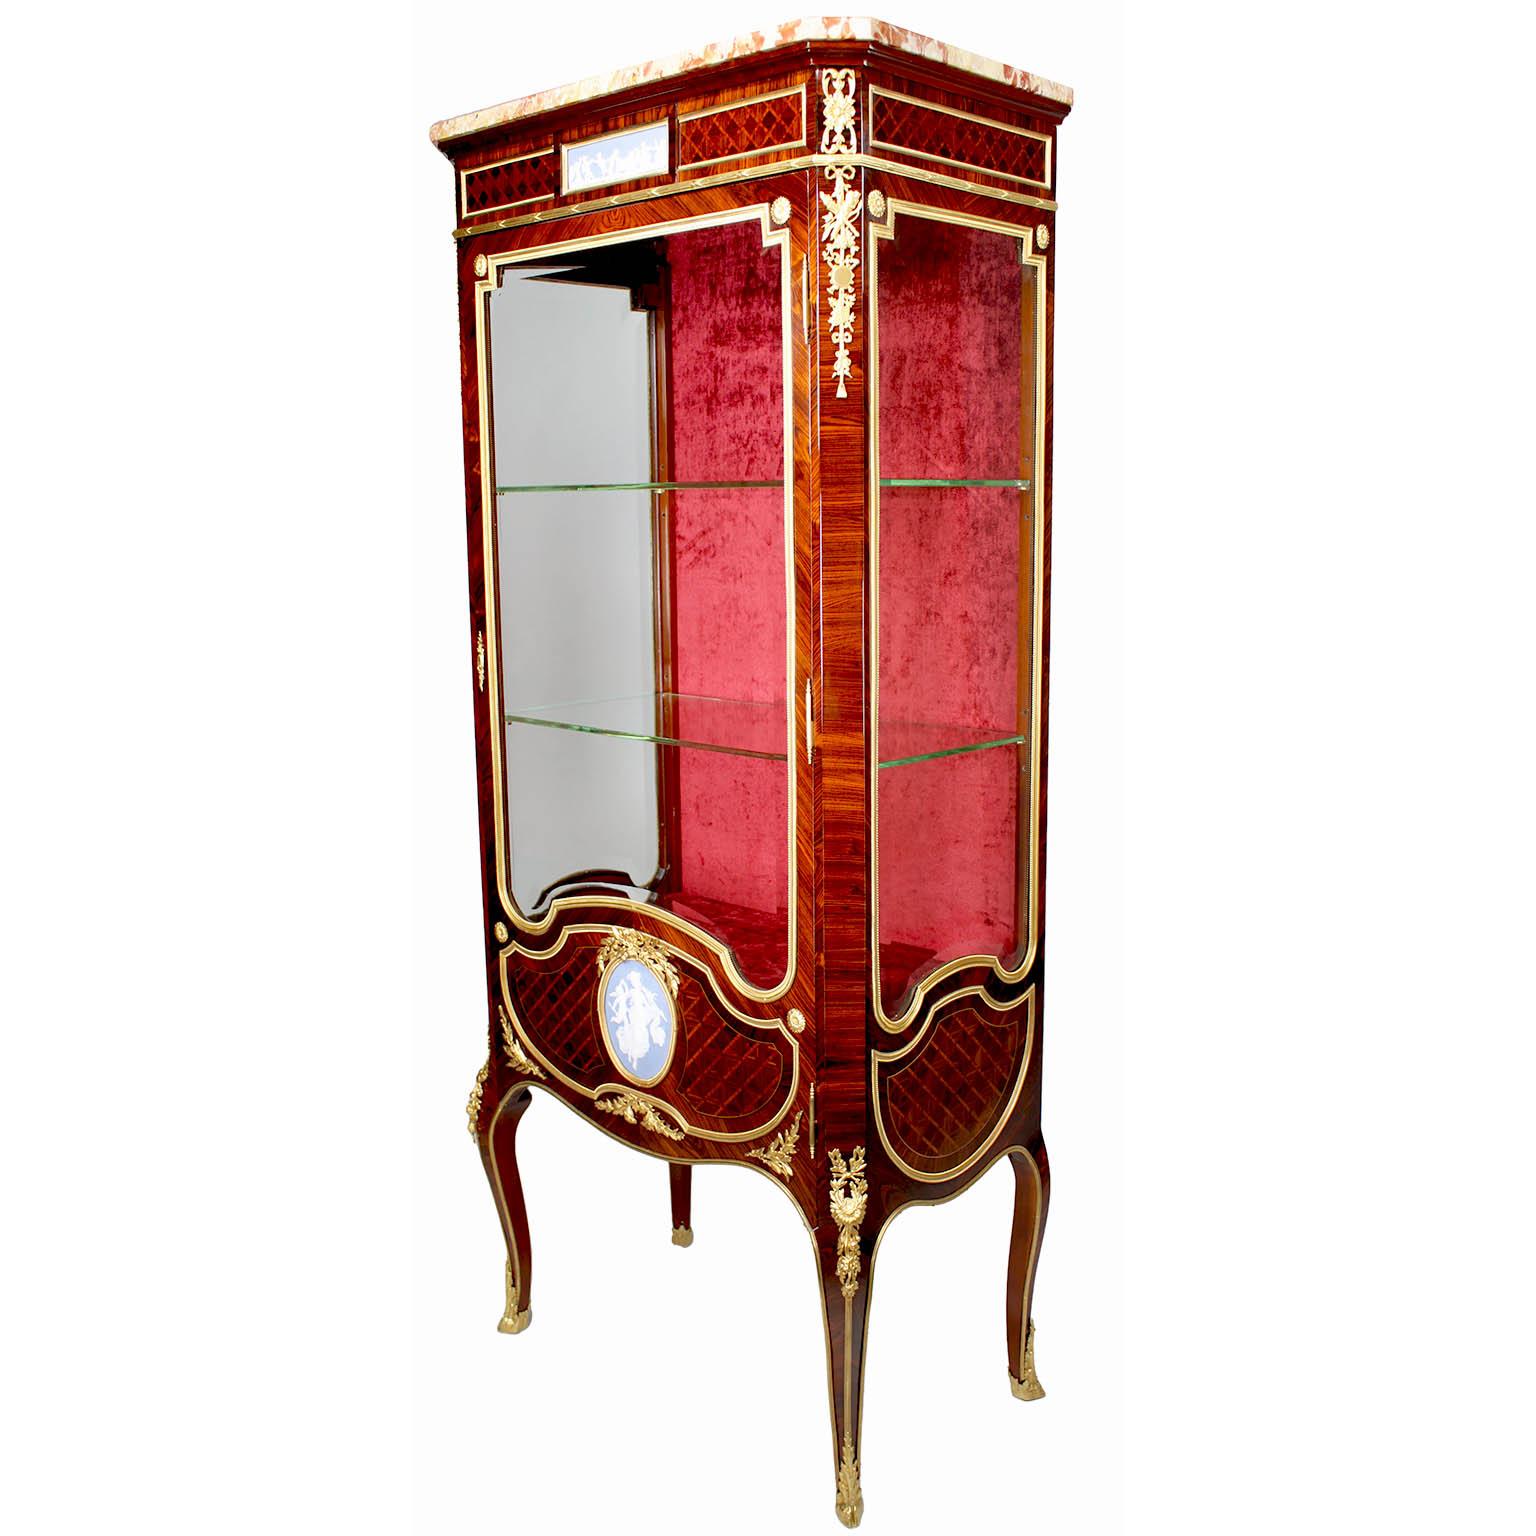 A Very Fine French 19th-20th Century Louis XV Style Ormolu and Jasperware-Mounted Rosewood, Mahogany and Kingwood Single Door Vitrine, possibly by François Linke (1855-1946). The upper front apron centered with an allegorical Jasperware plaque